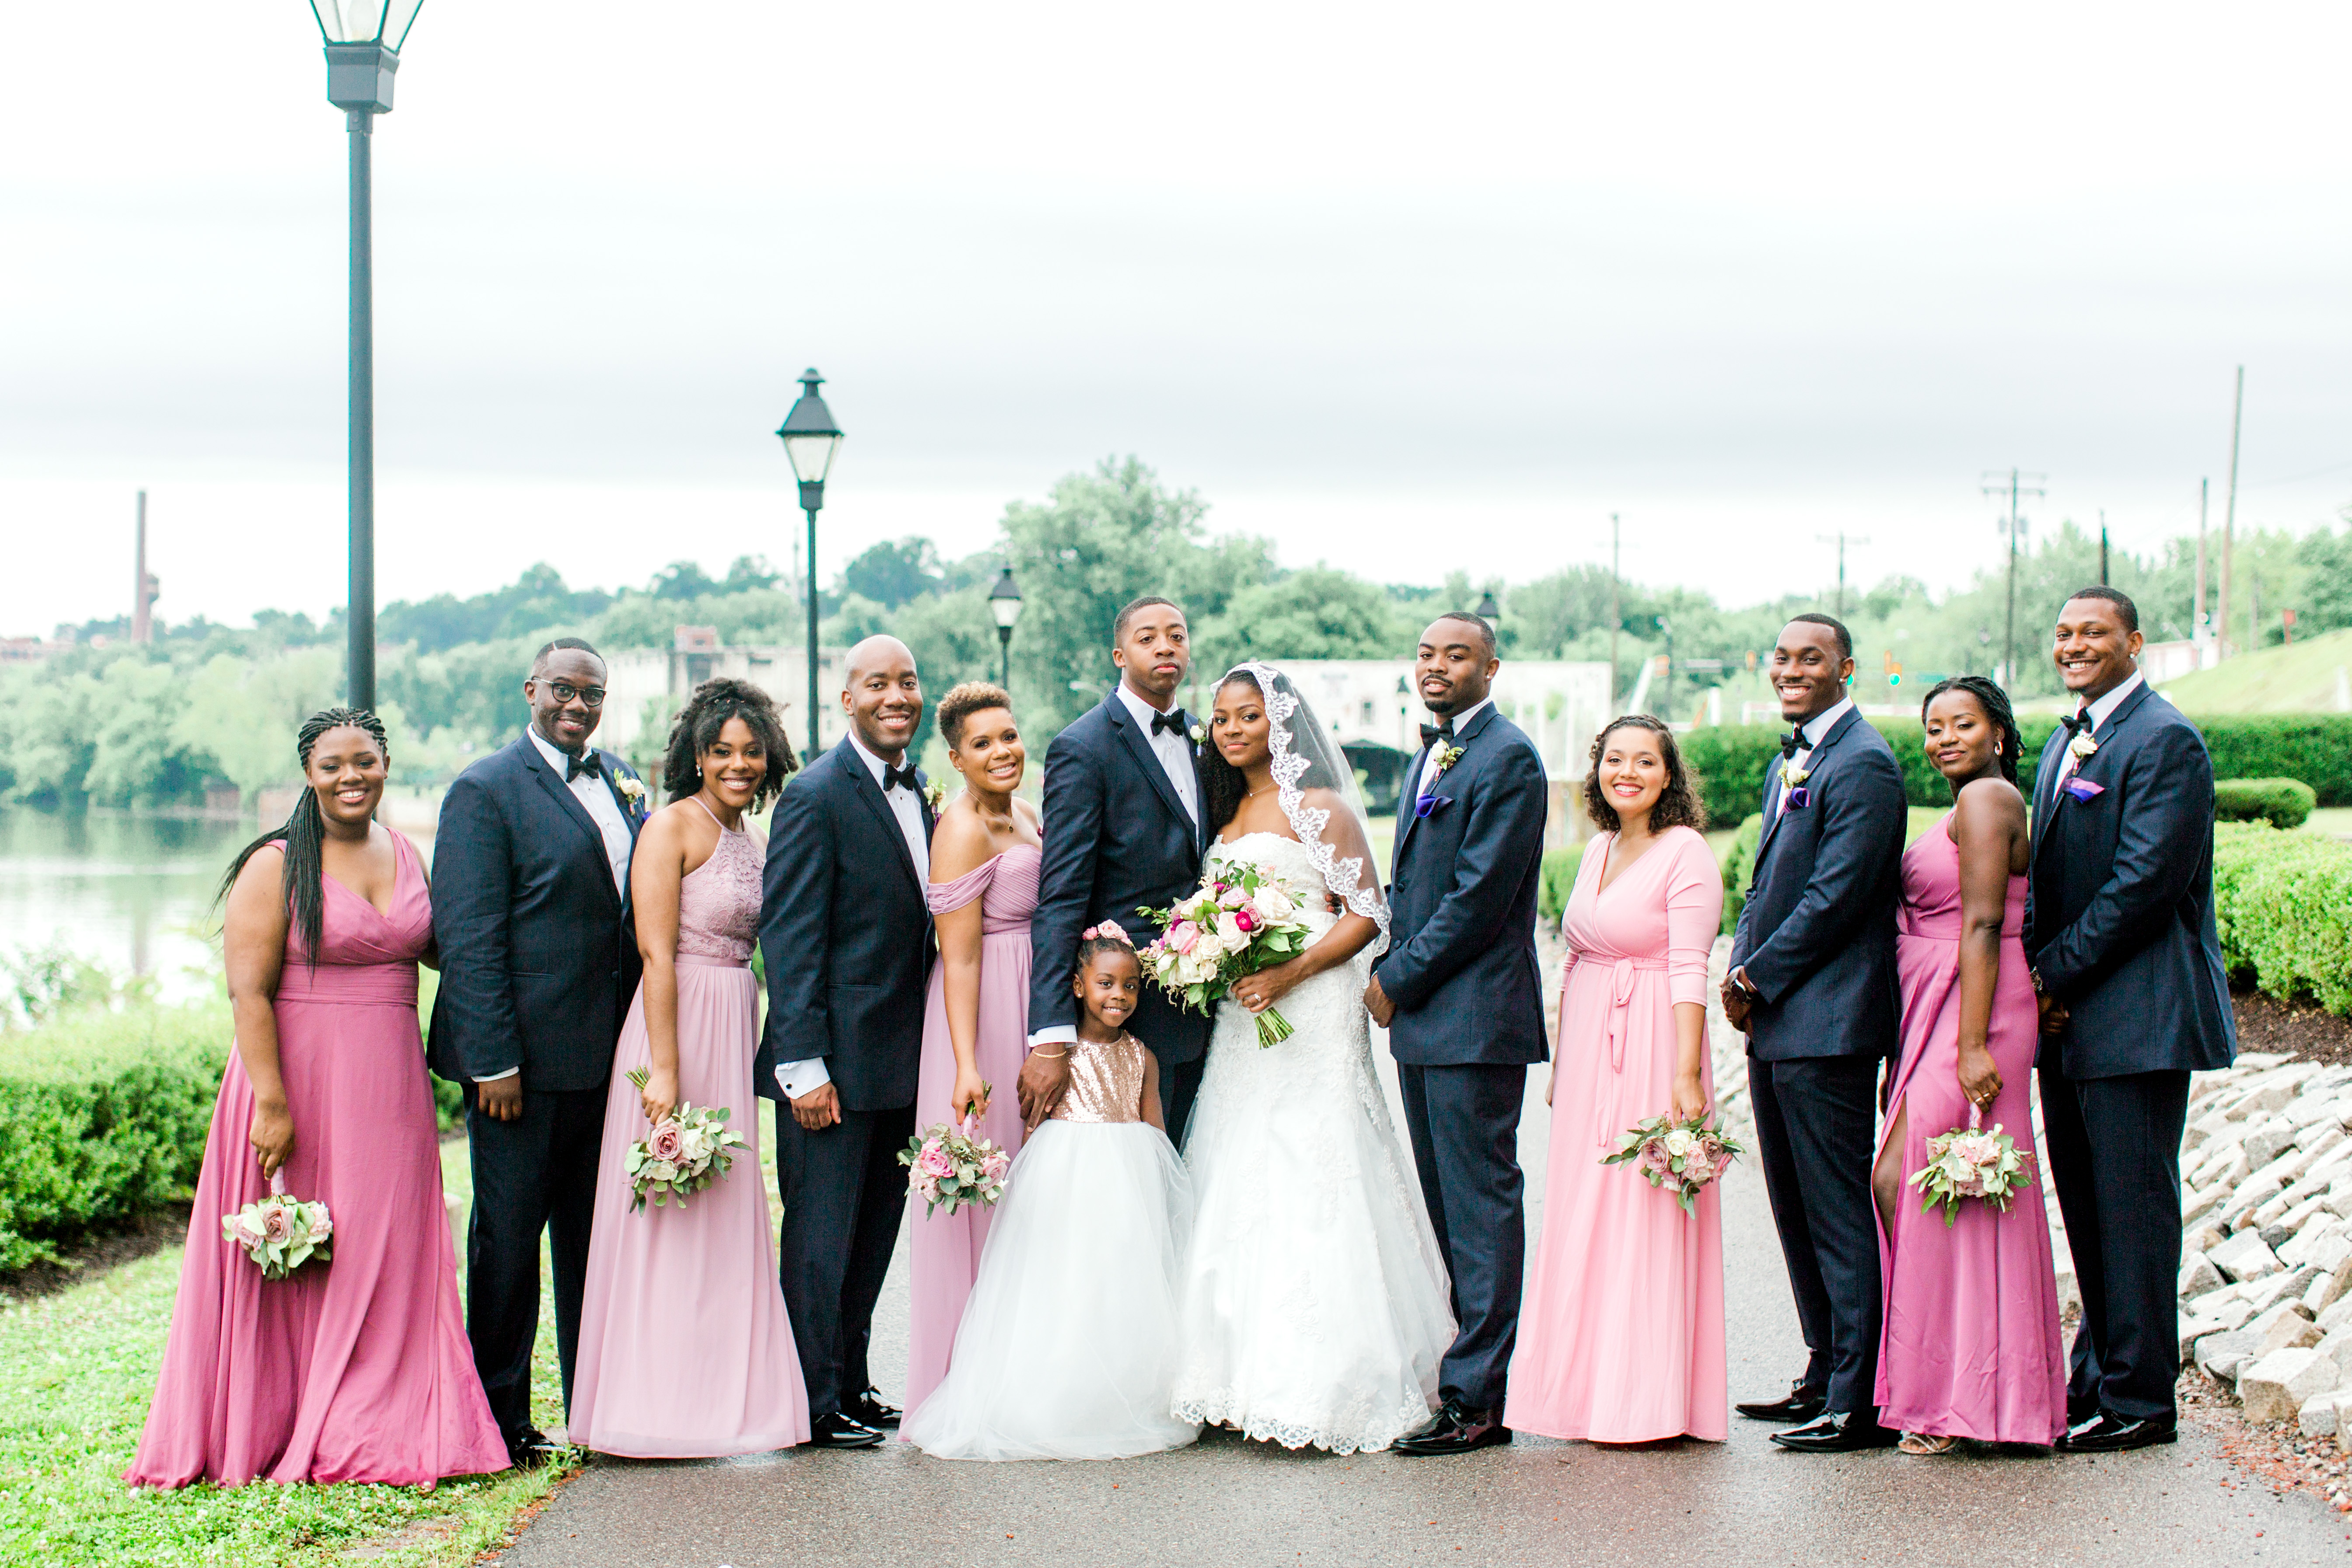 Wedding bridal party standing outside wearing navy and blush